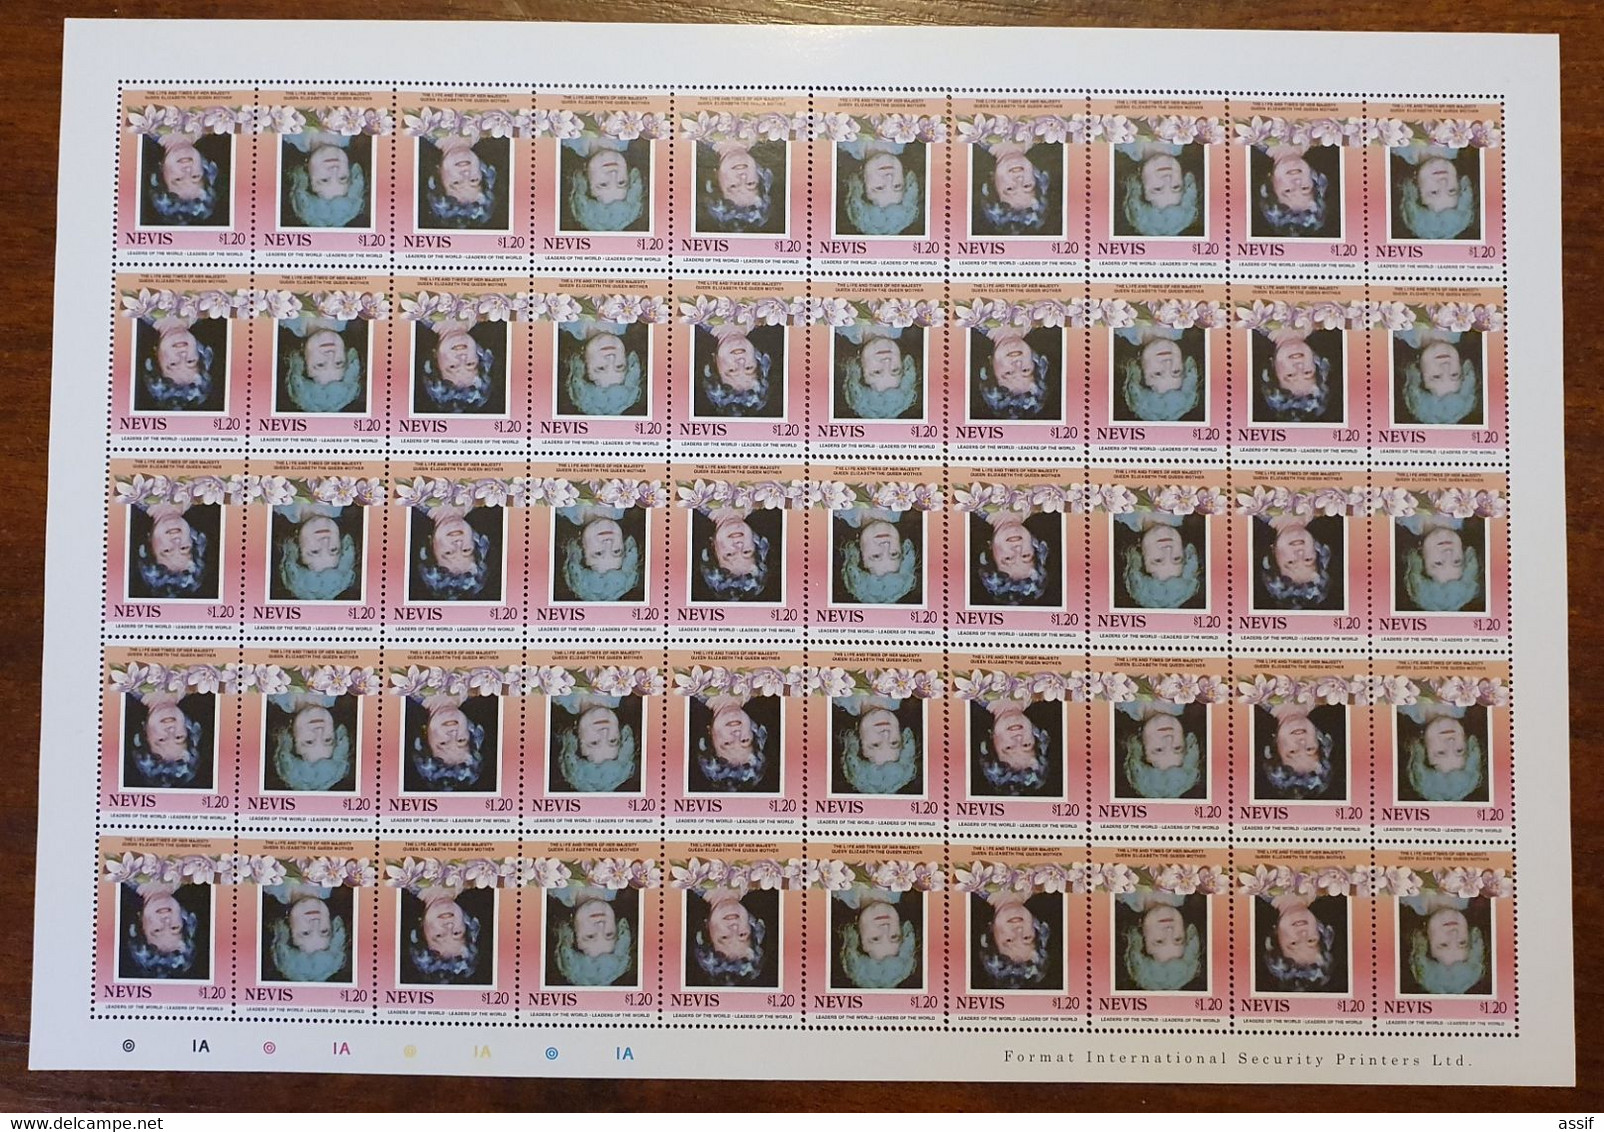 NEVIS 1,20$ 1985 FEUILLE ENTIERE CENTRE RENVERSE SHEET INVERTED YT 315 Et 316 50 TIMBRES NEUFS ** /FREE SHIPPING R - St.Kitts-et-Nevis ( 1983-...)